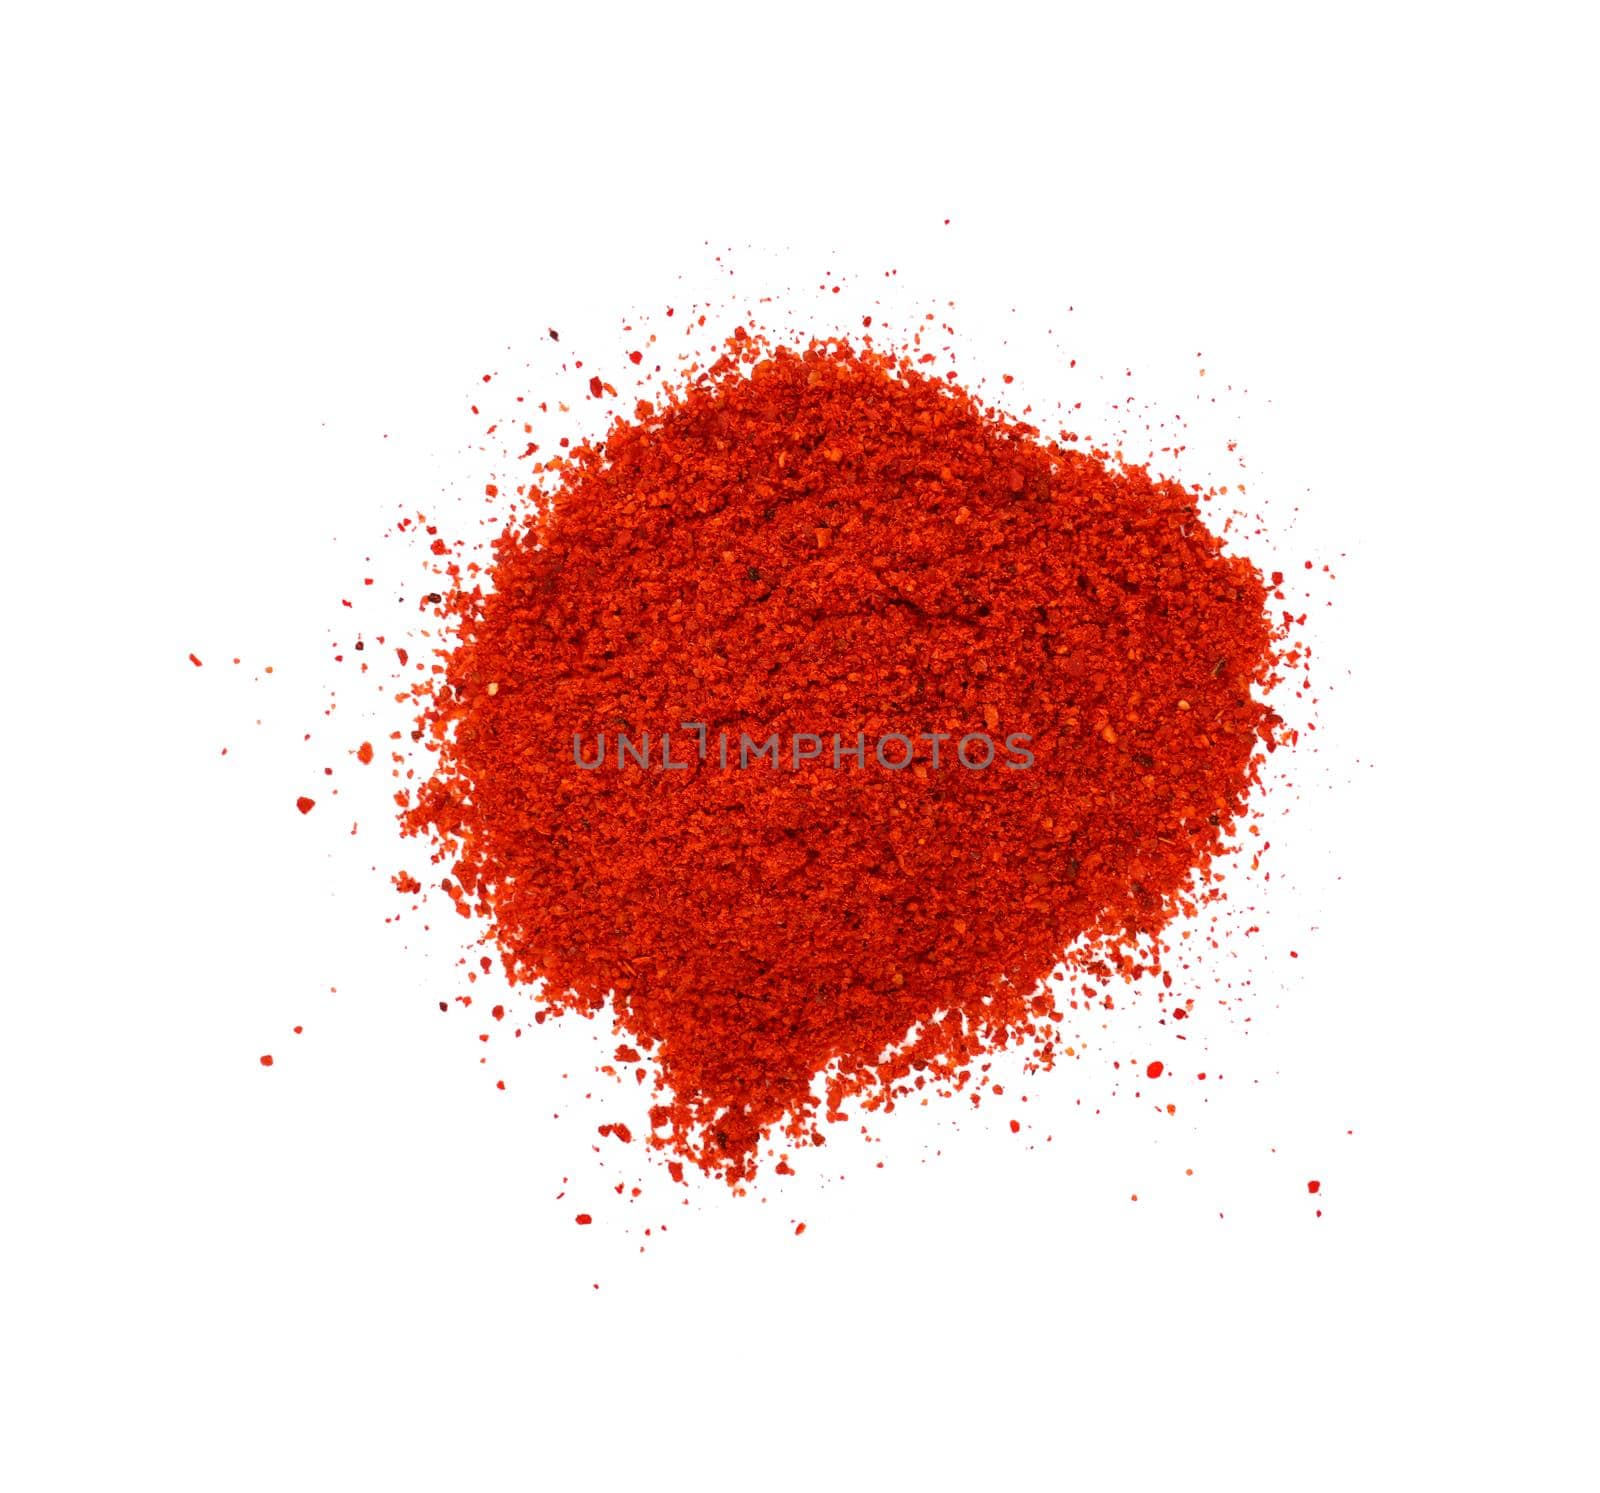 Heap of dried red hot chili pepper by BreakingTheWalls